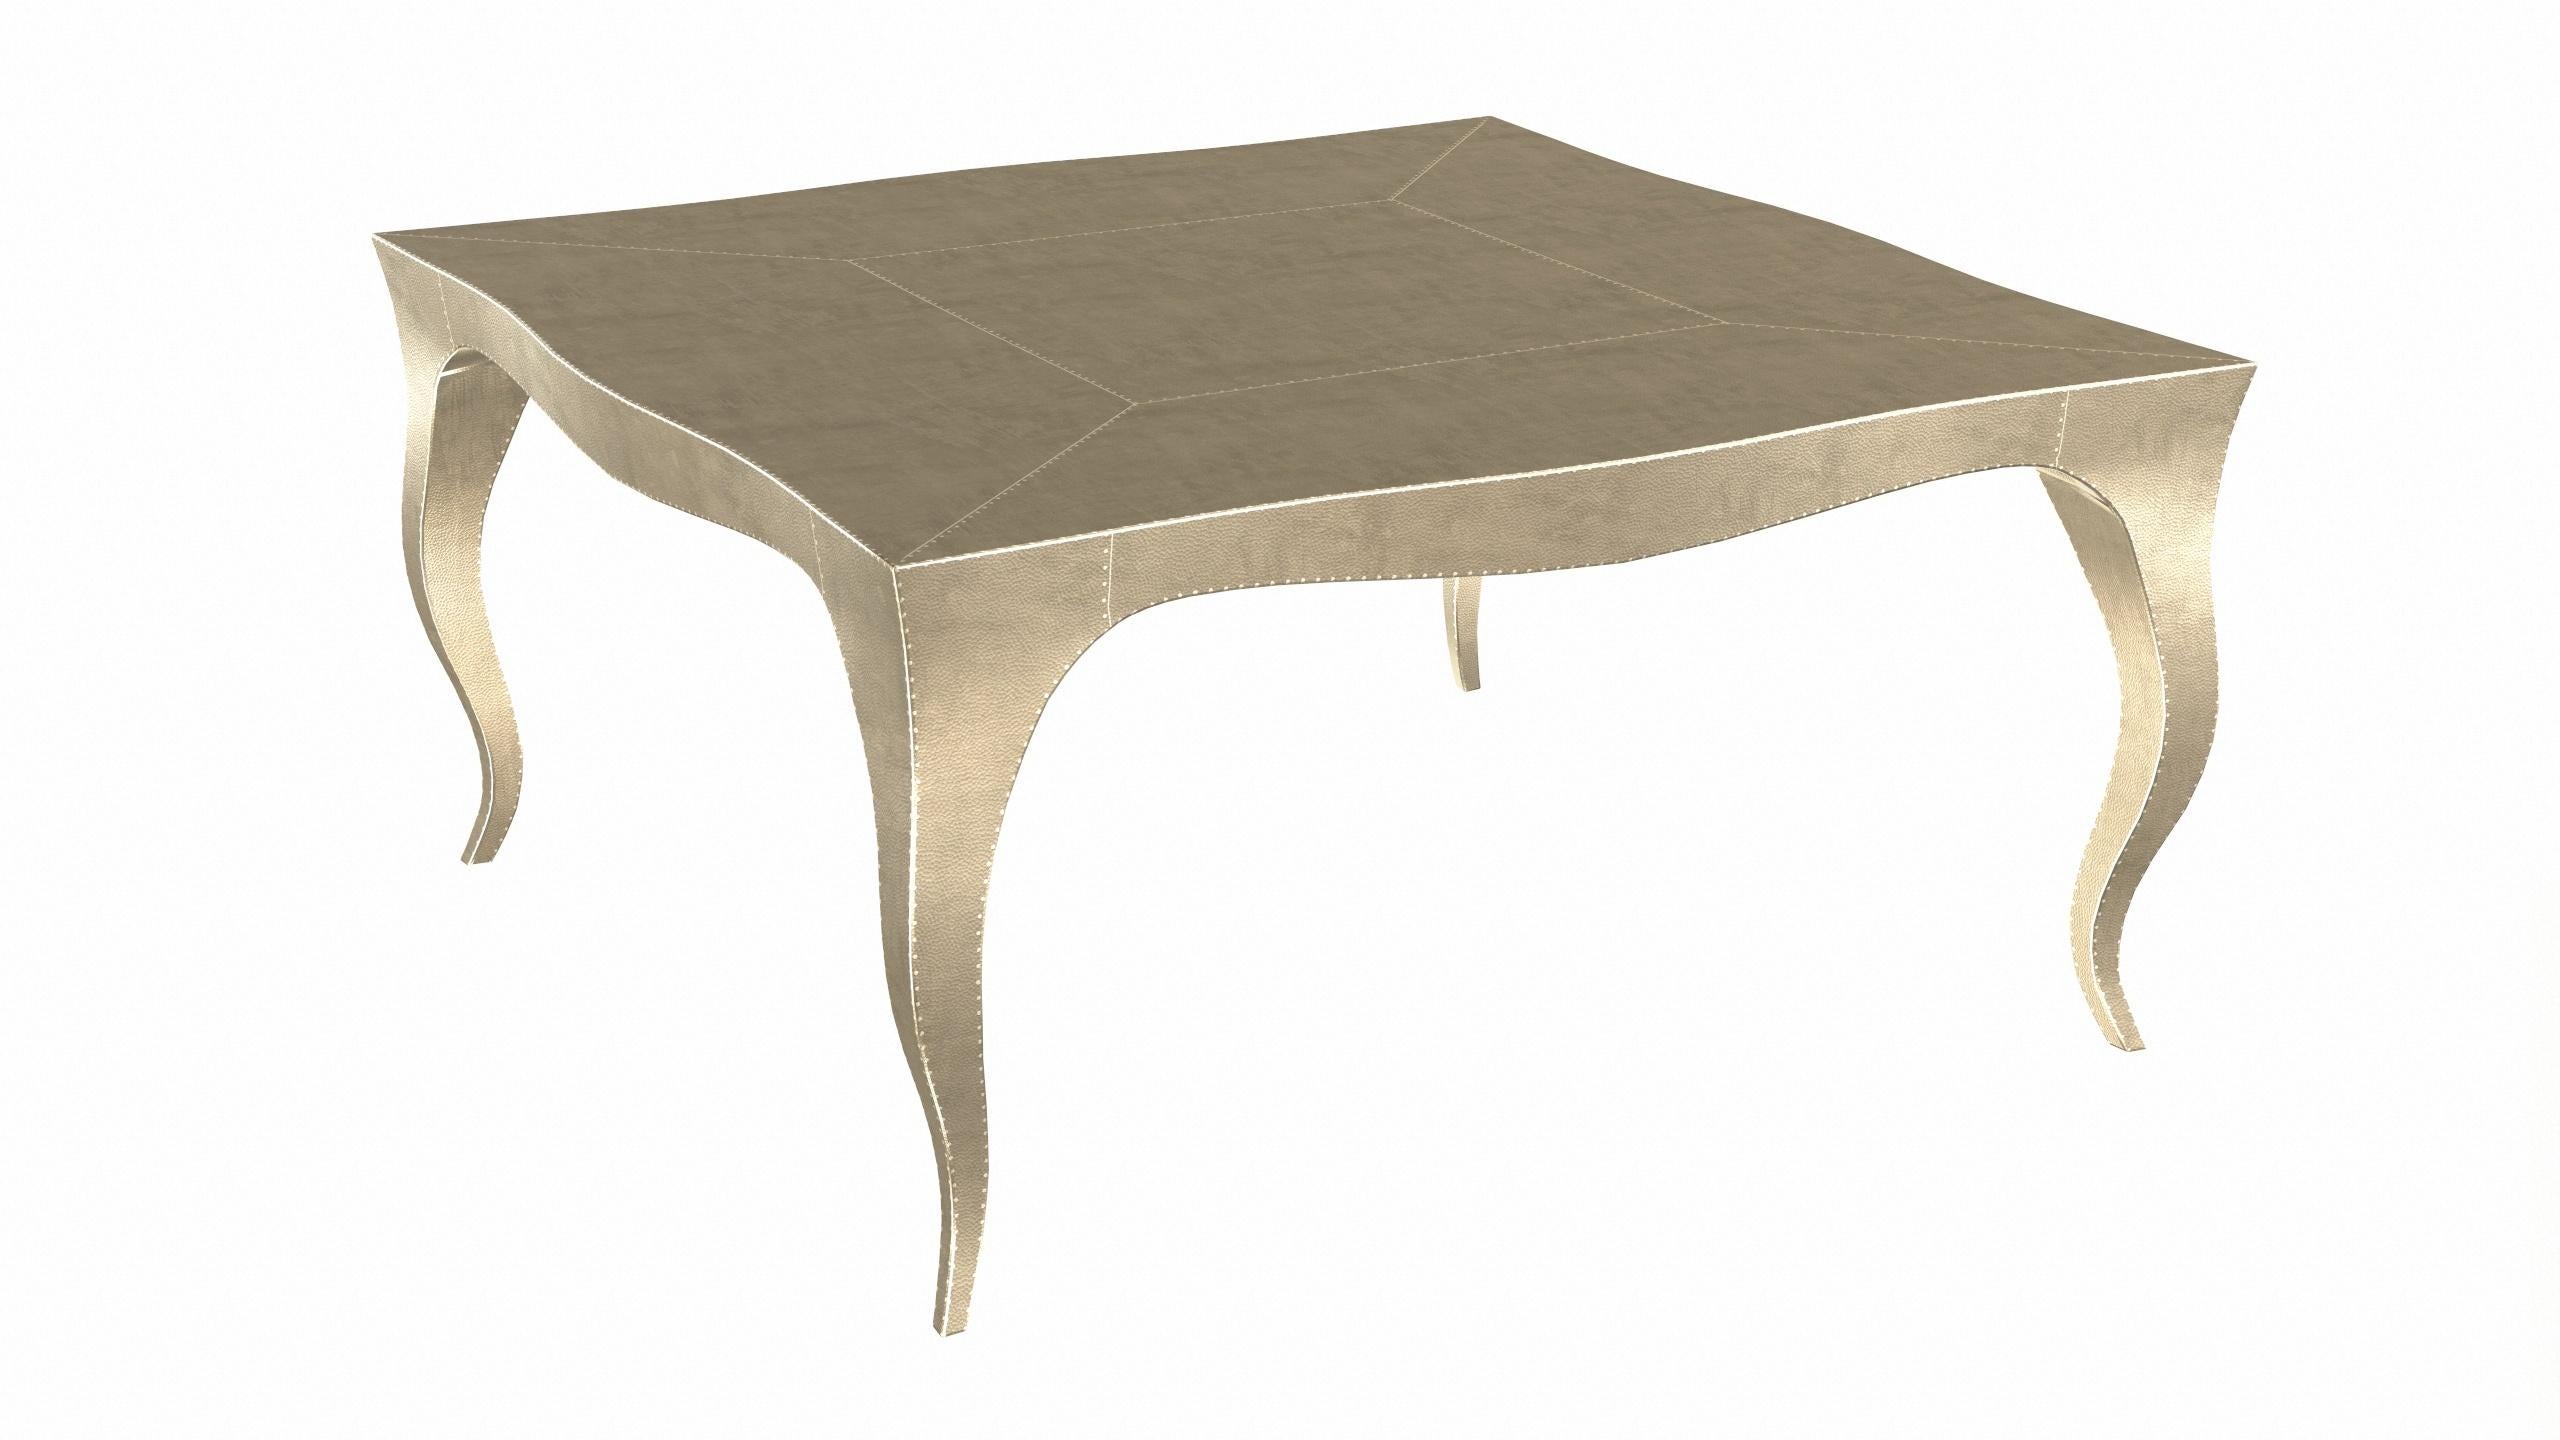 Hand-Carved Louise Art Deco Nesting Tables Mid. Hammered Brass 18.5x18.5x10 inch by Paul M. For Sale